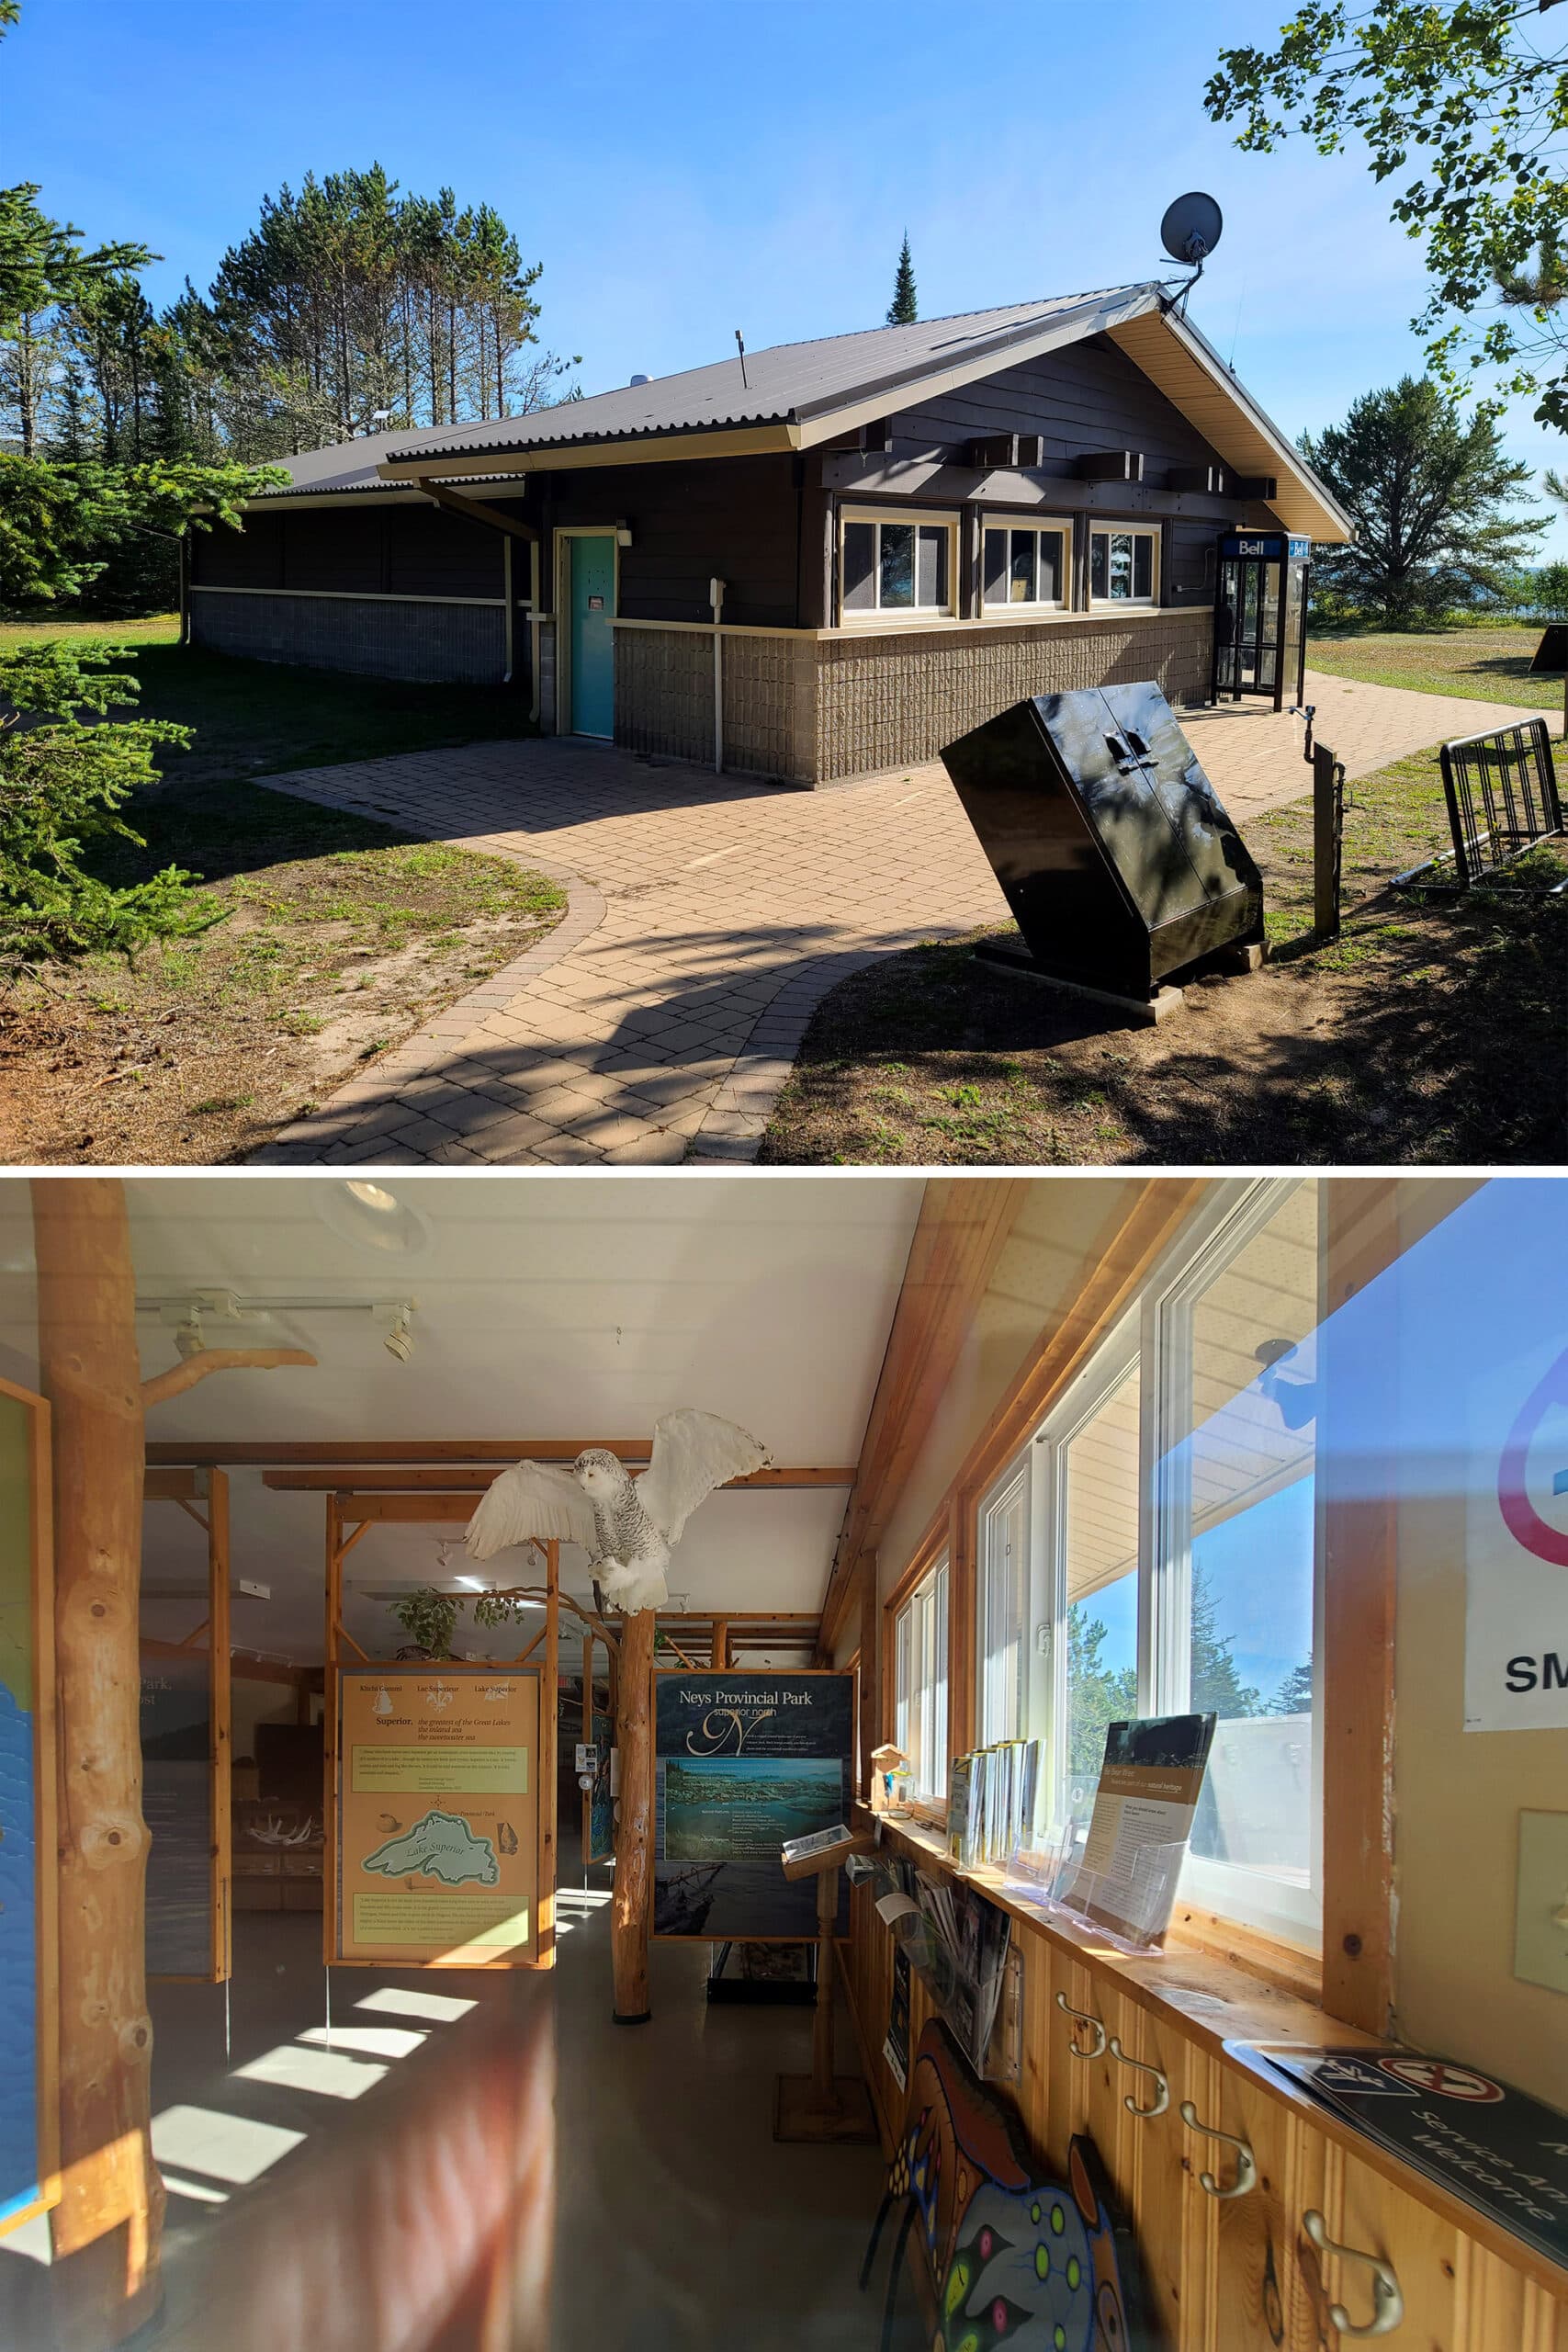 2 part image showing in the interior and exterior of the neys provincial park visitor center.